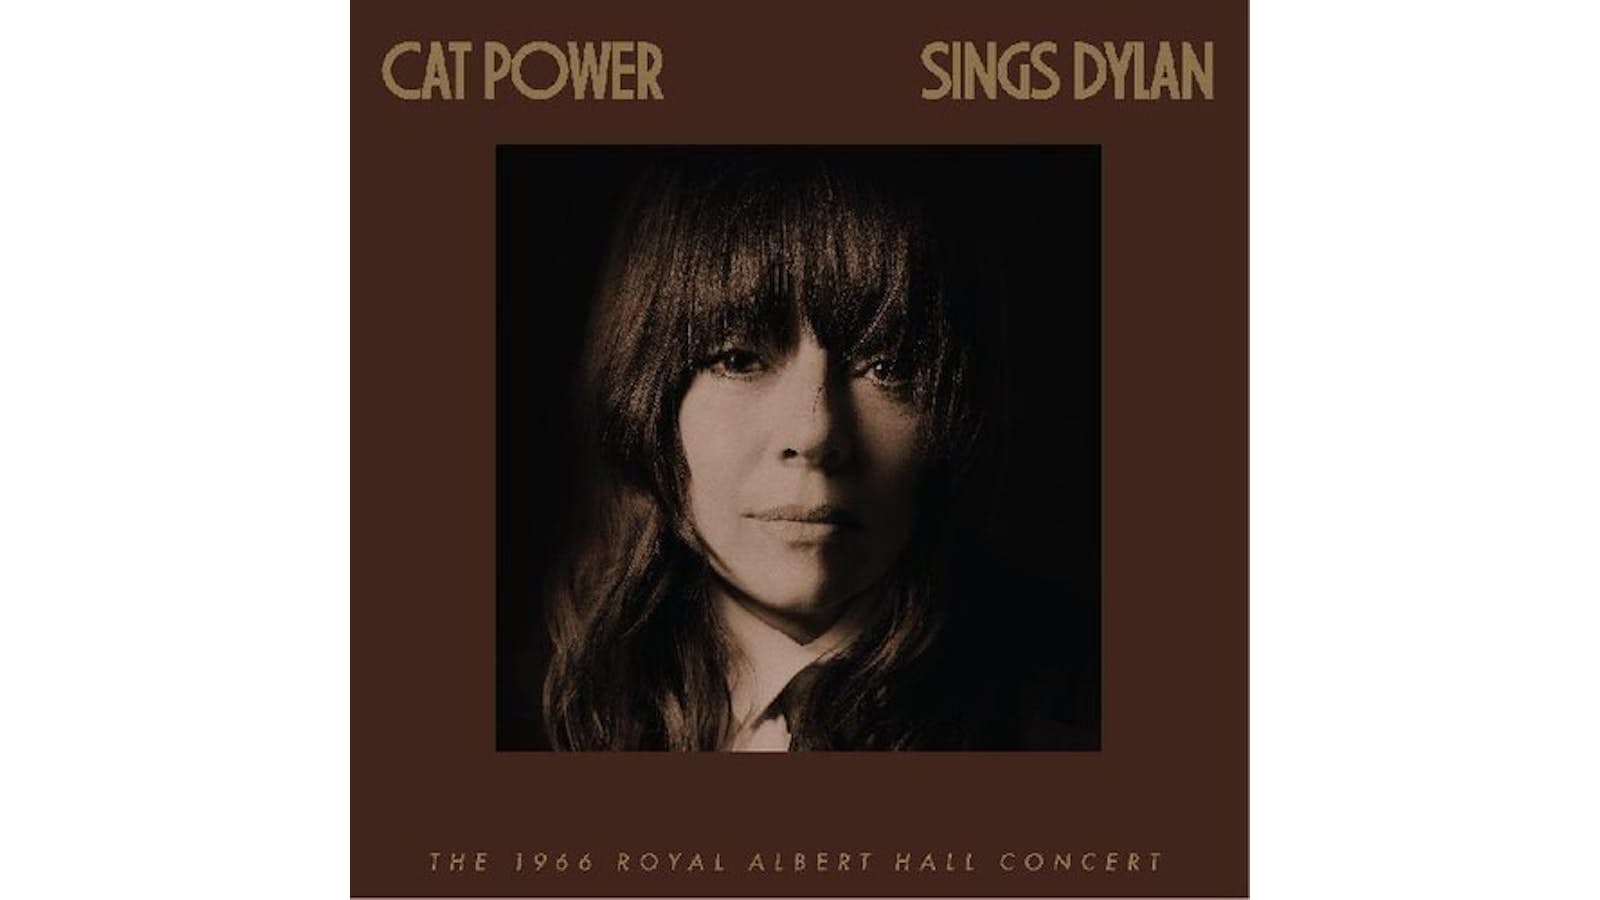 Cat Power - She Belongs To Me (Live at the Royal Albert Hall) 